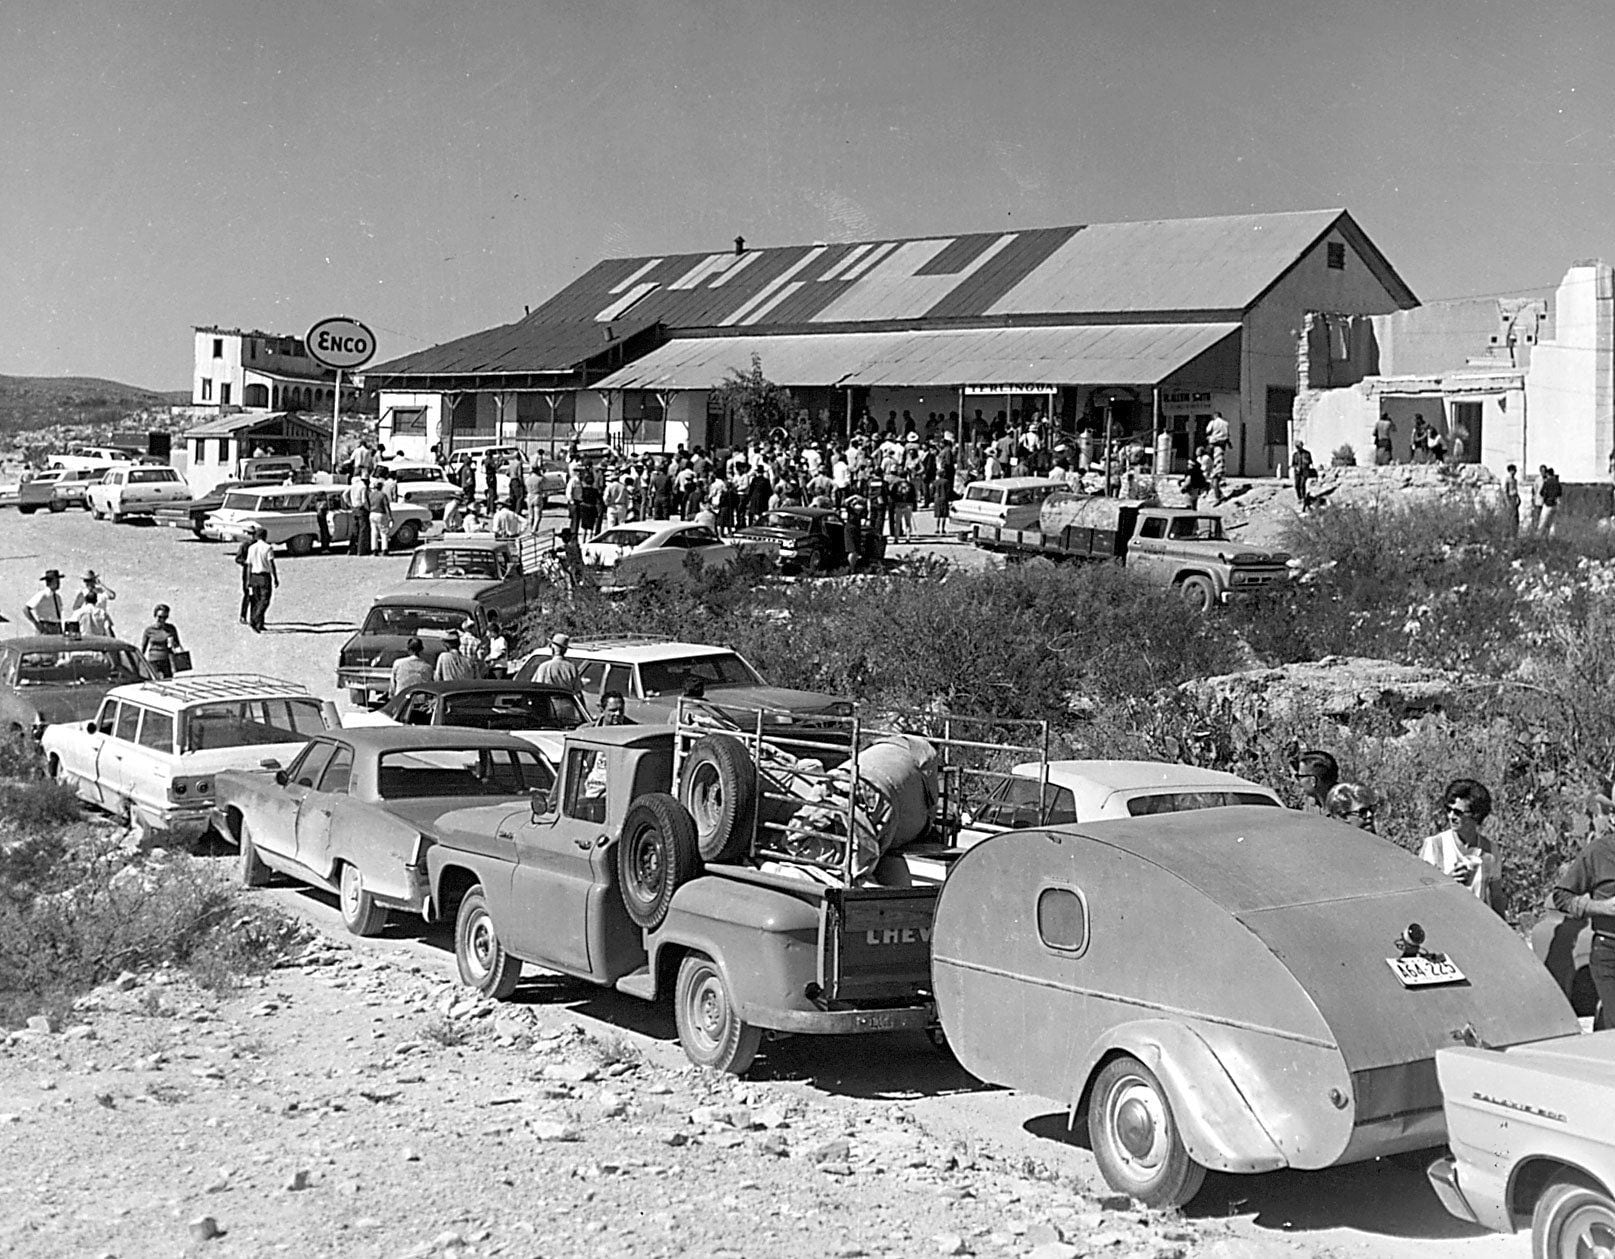 Terlingua has been the chili cook-off capital of Texas since the 1960s. 